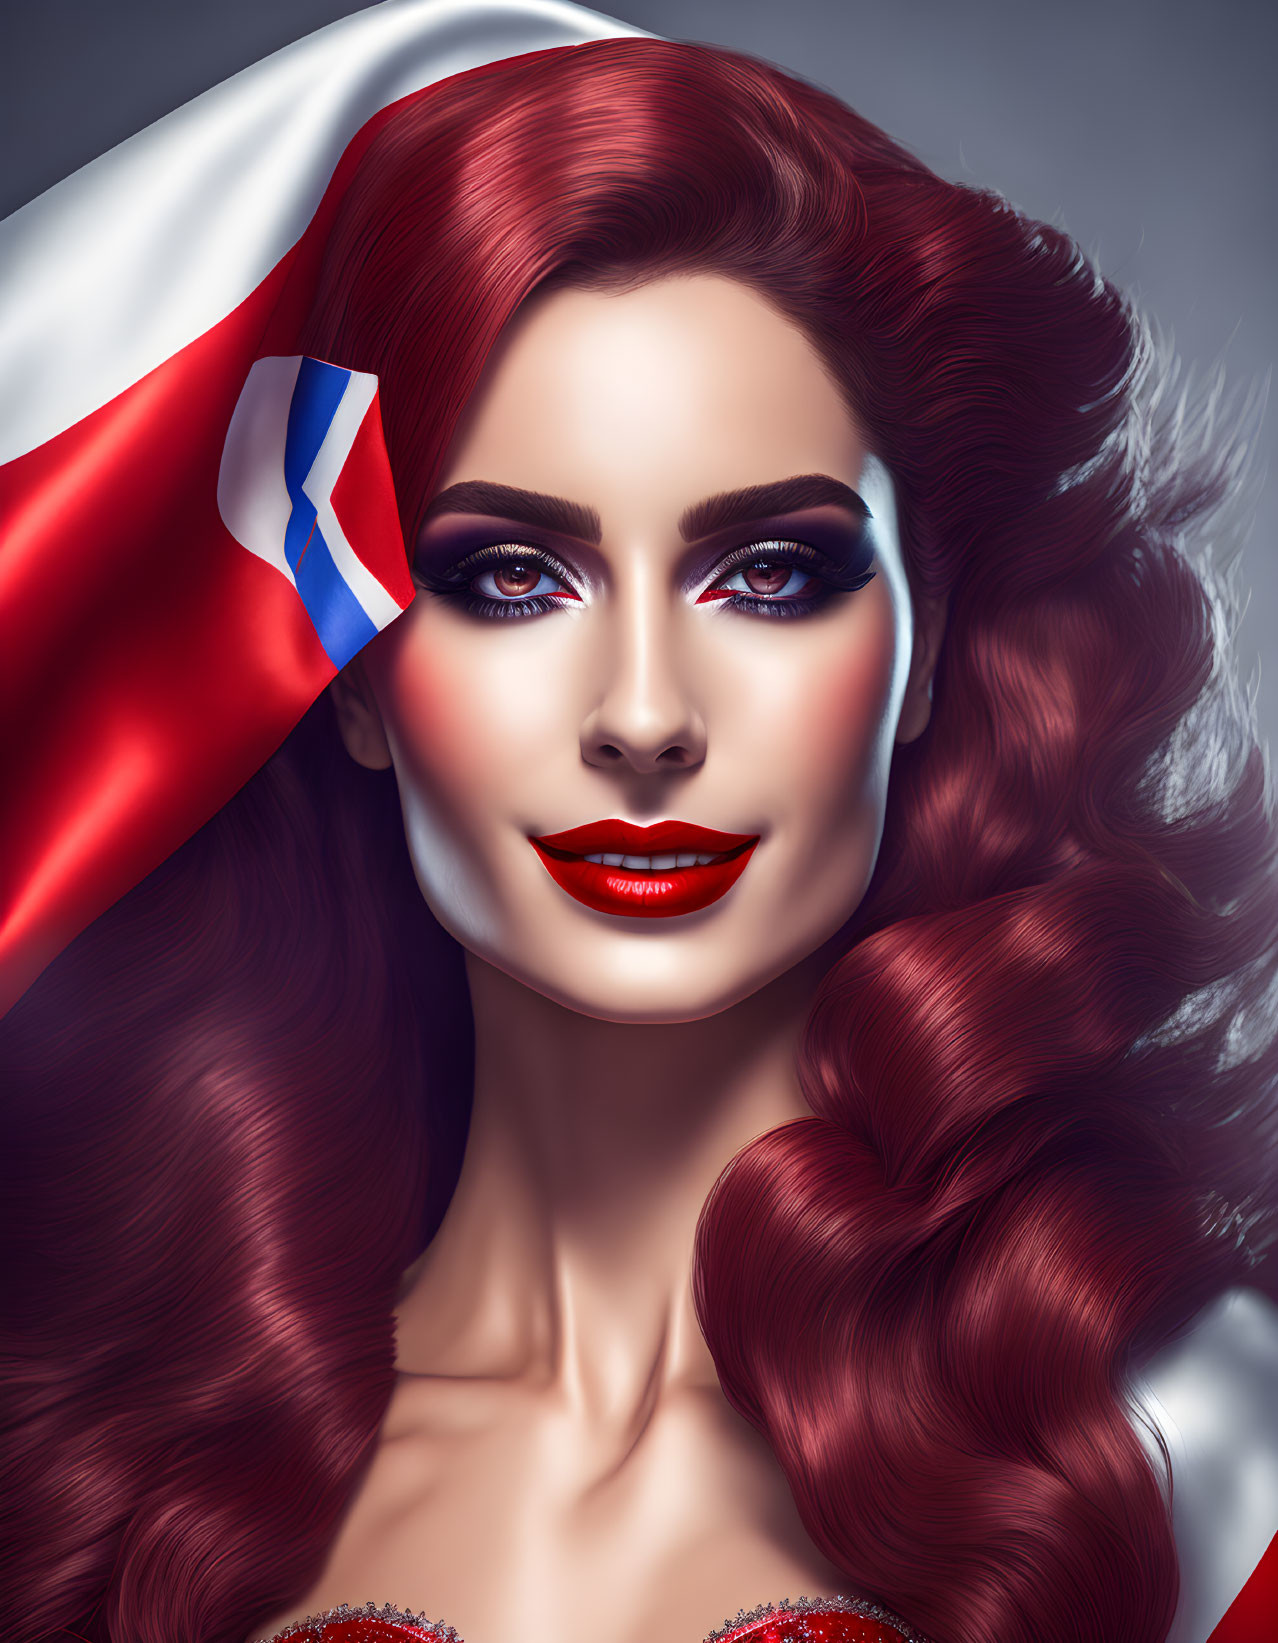 Digital portrait: Woman with red hair, red lipstick, blue eyeshadow, draped in flag.